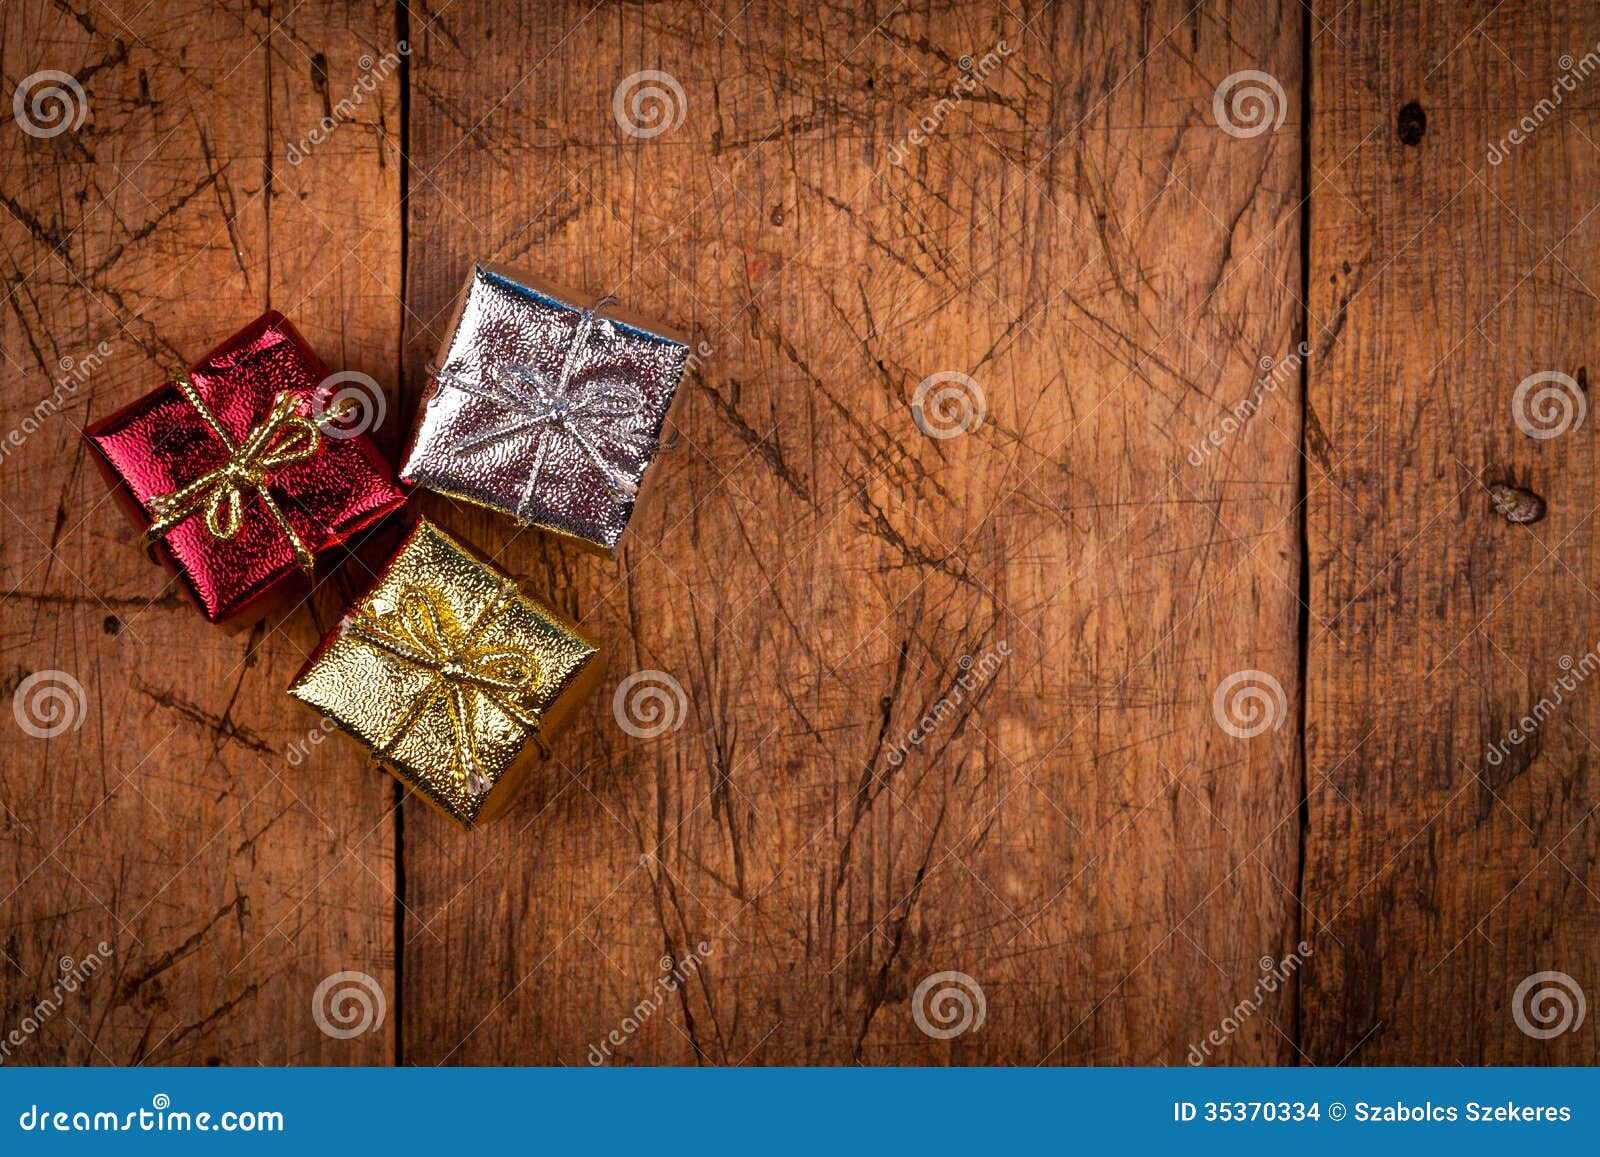 Three Small Gift Box On Vintage Wooden Table Stock Photo 